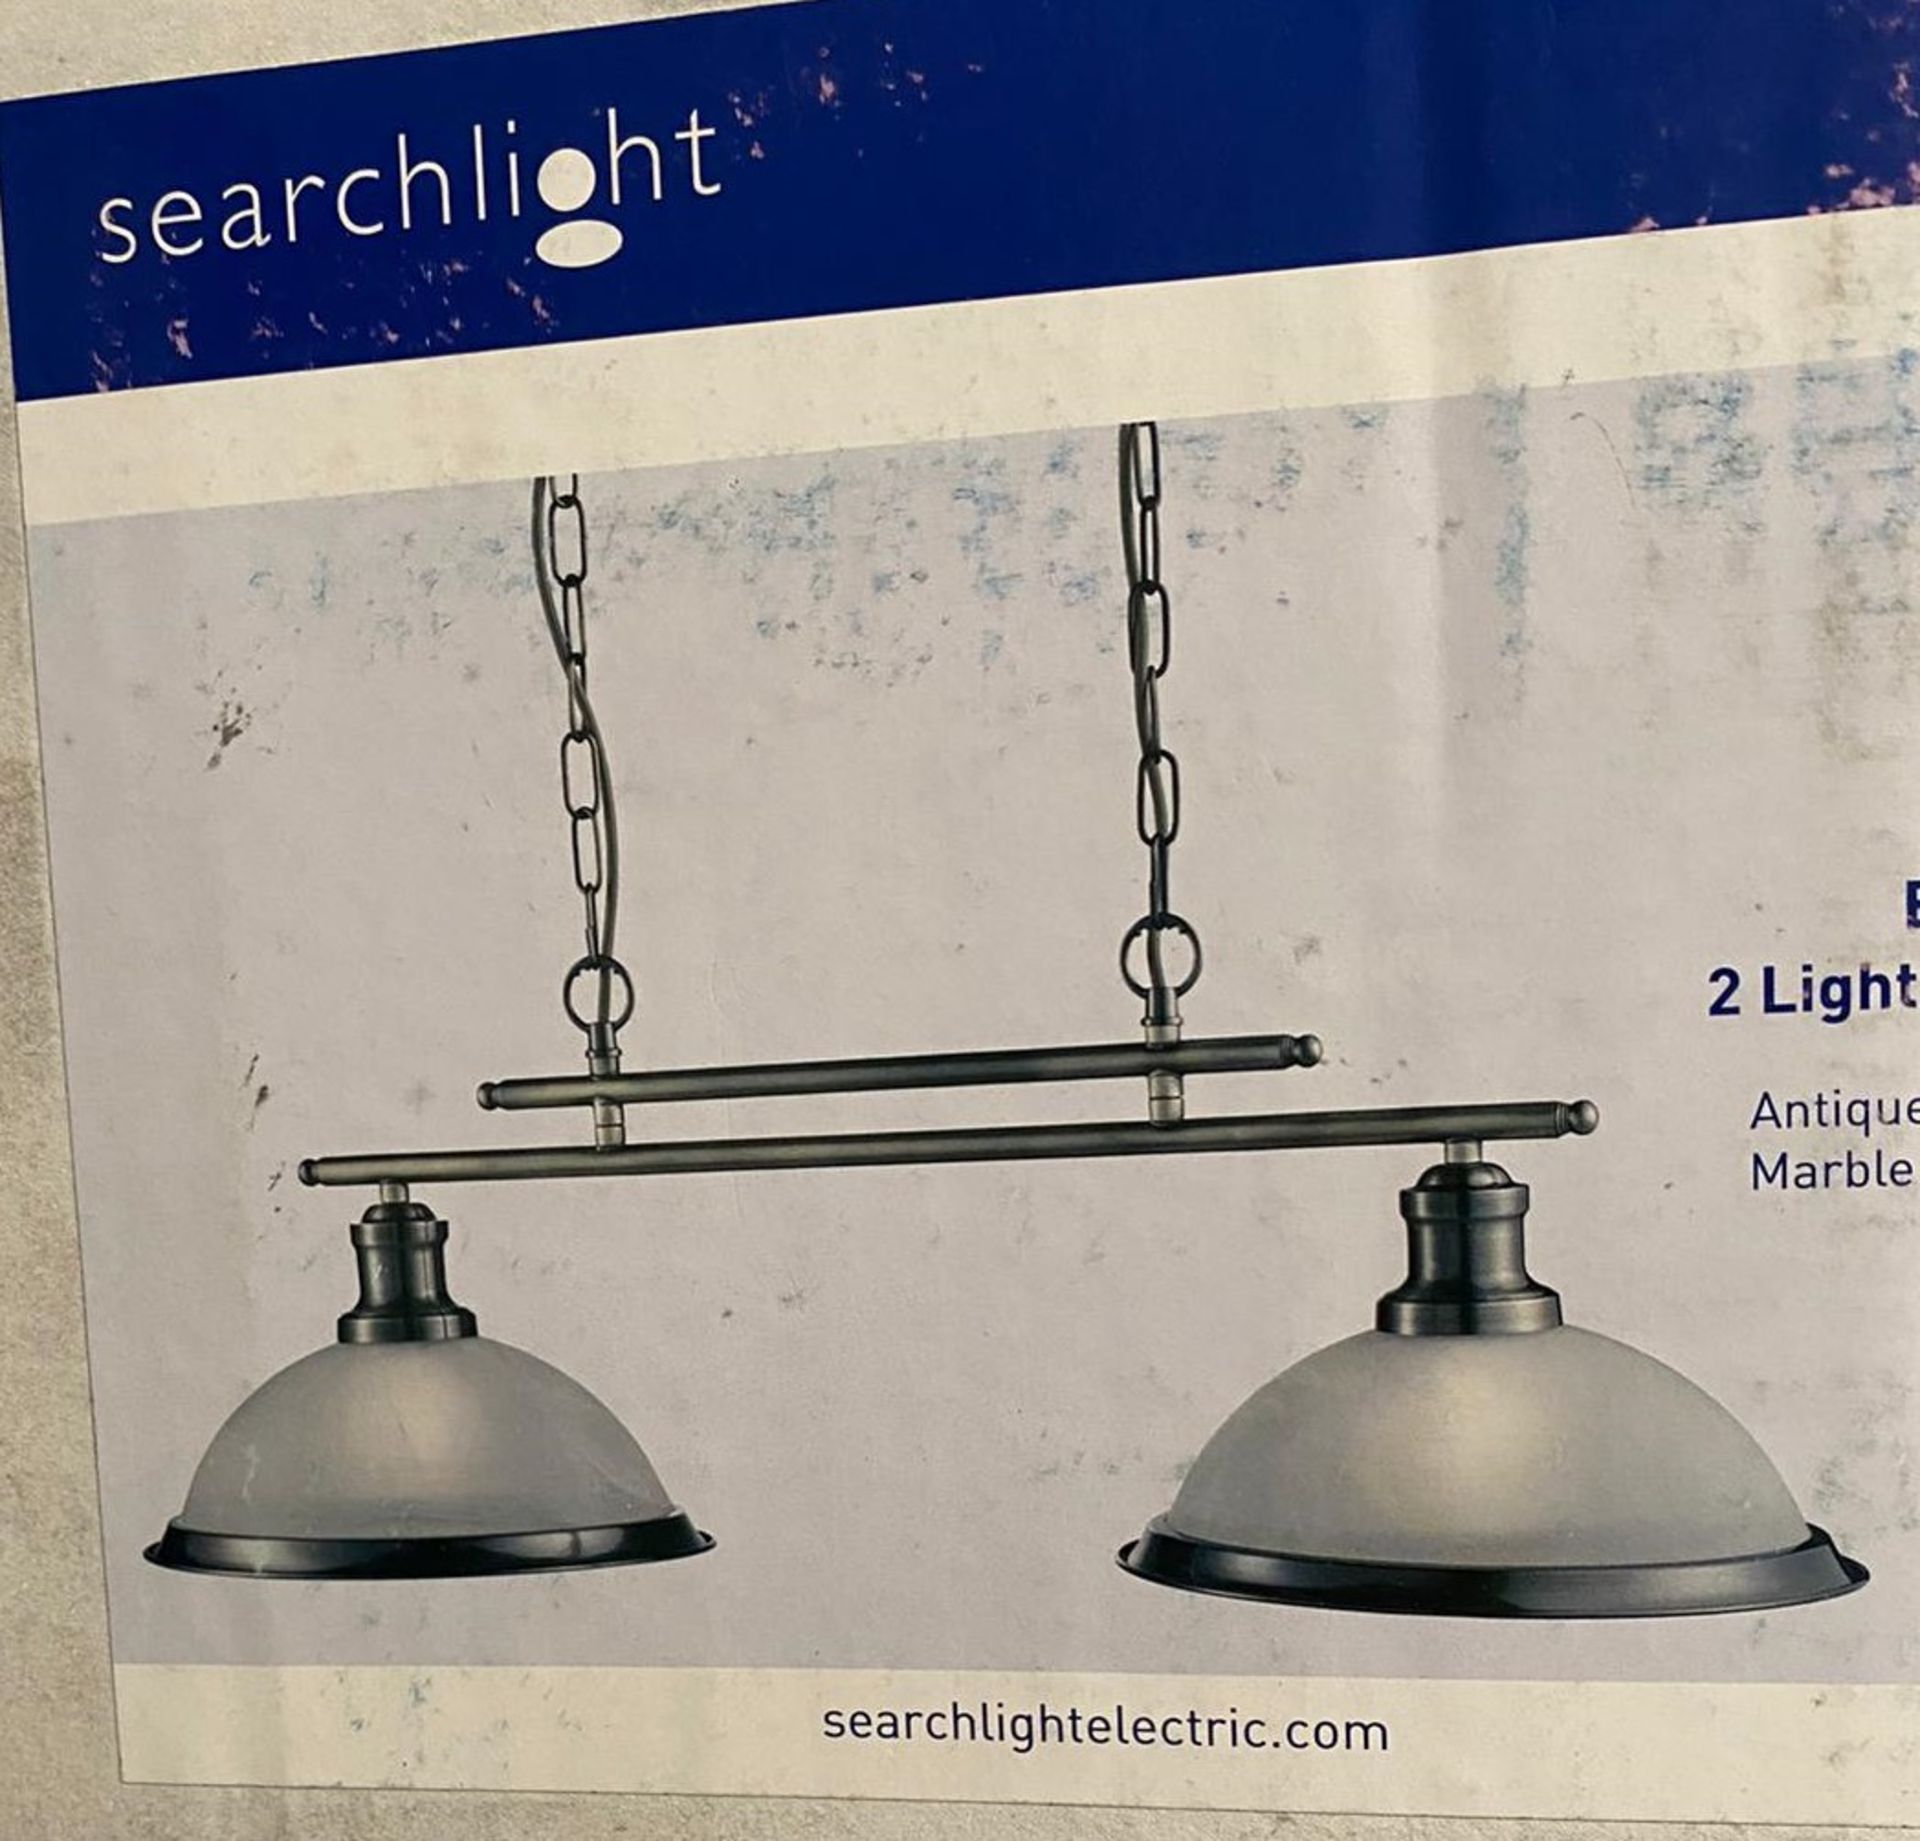 1 x Searchlight Bistro 2 Light Ceiling Bar in Antique Brass - Ref: 2682-2AB - New Boxed - RRP: £115 - Image 2 of 3